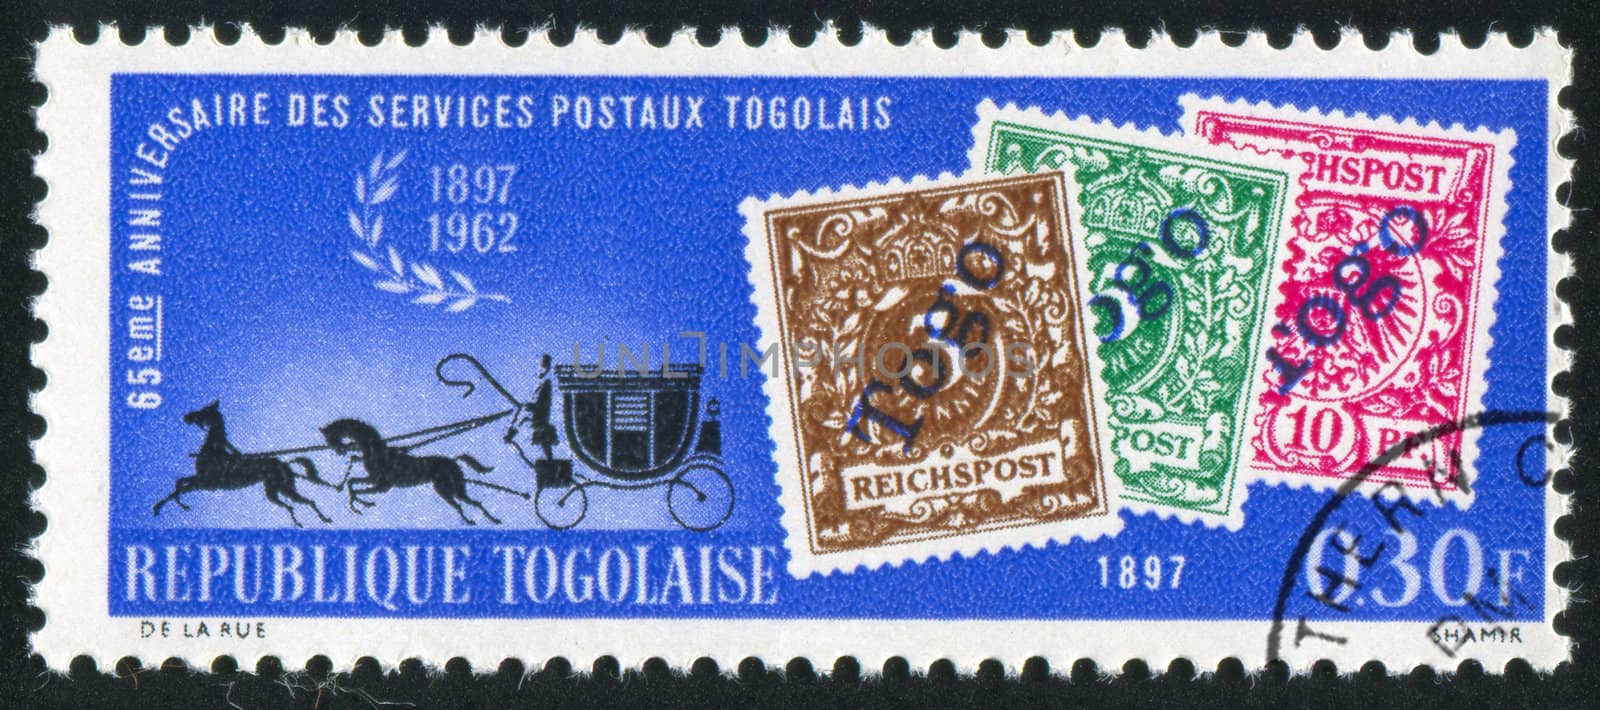 TOGO - CIRCA 1963: stamp printed by Togo, shows Mail Coach and Stamps of 1897, circa 1963